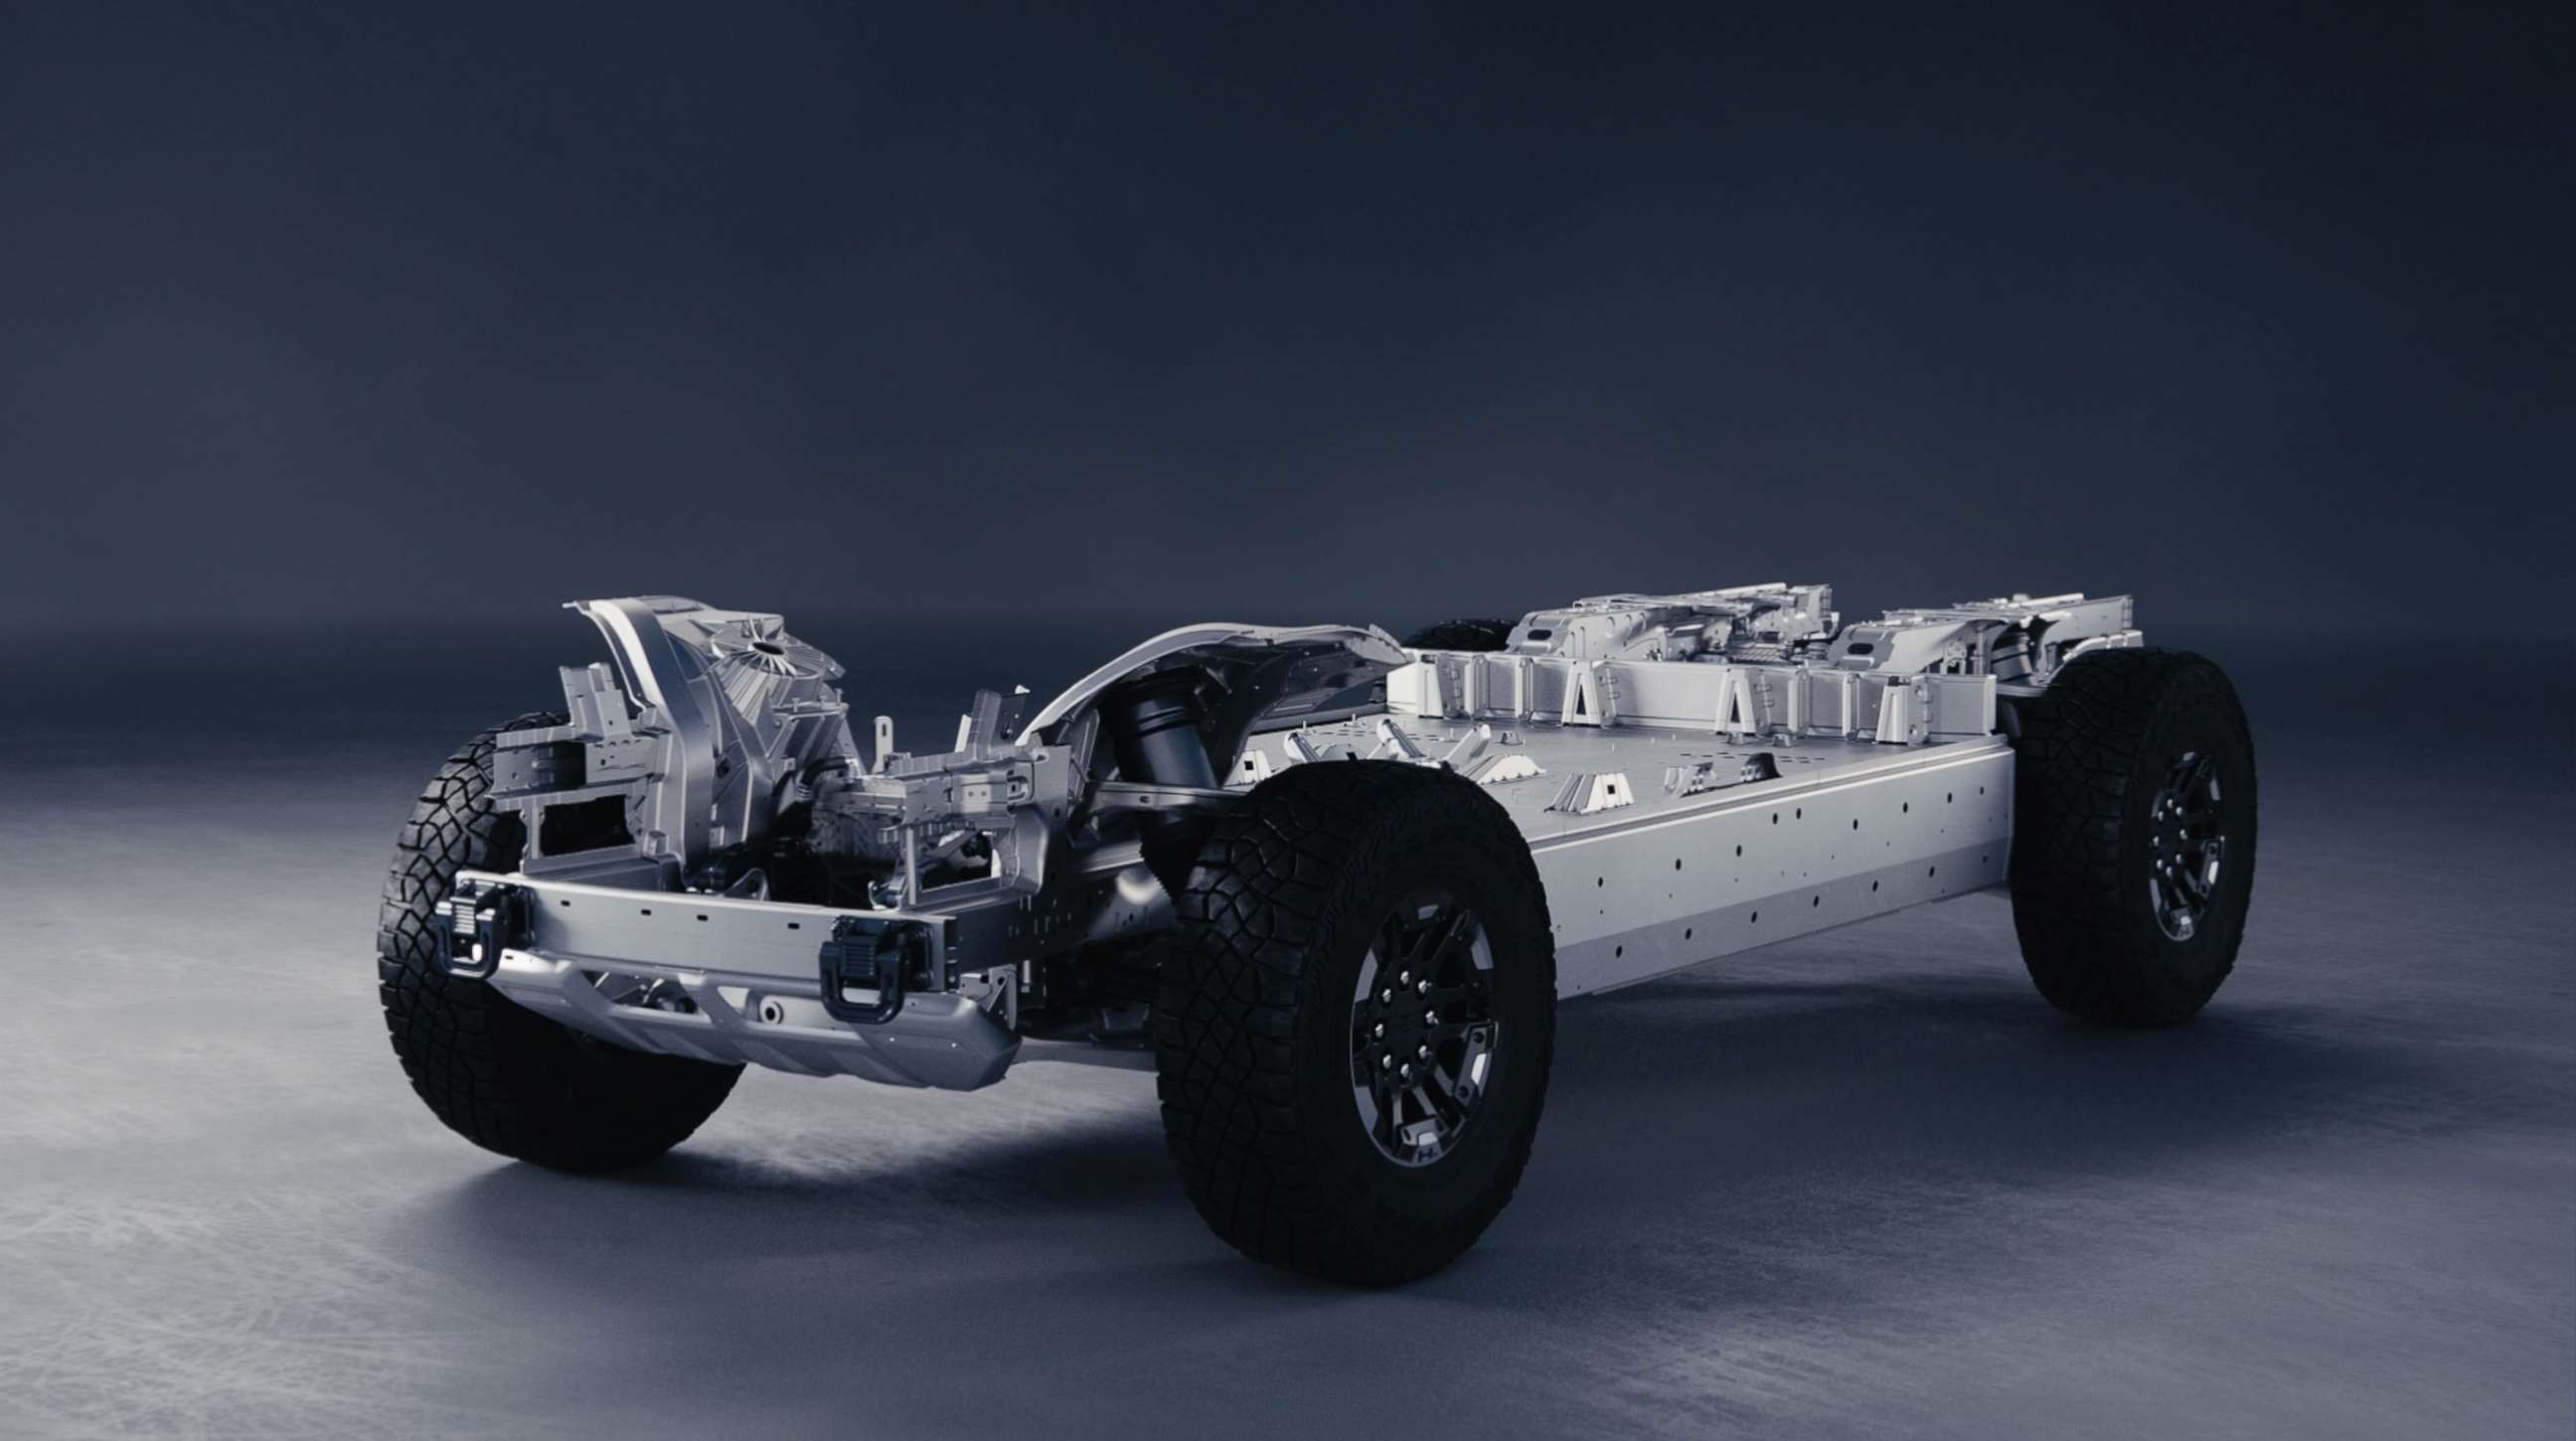 PHOTO: The Ultium platform is the foundation of GM's EV strategy, including the battery cells, modules and pack, plus drive units containing electric motors and integrated power electronics.